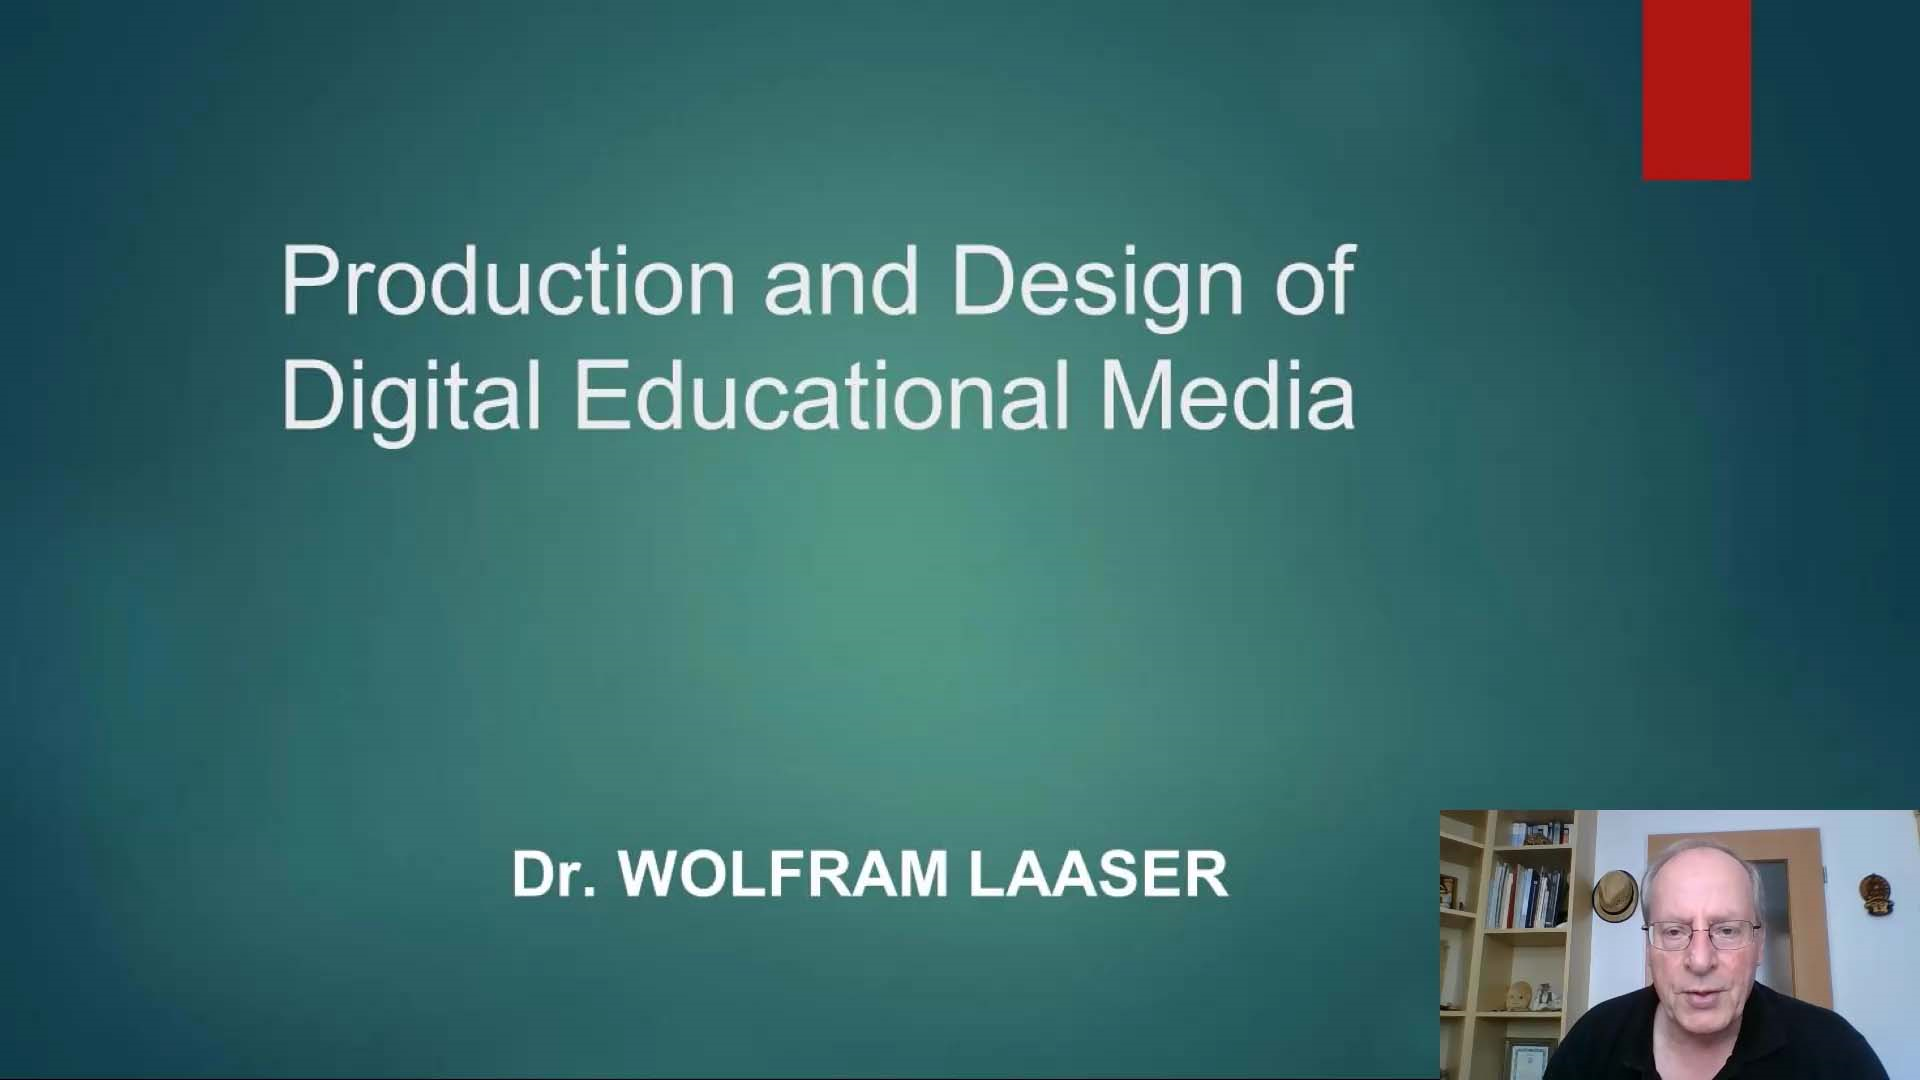 Production and Design of Digital Educational Media